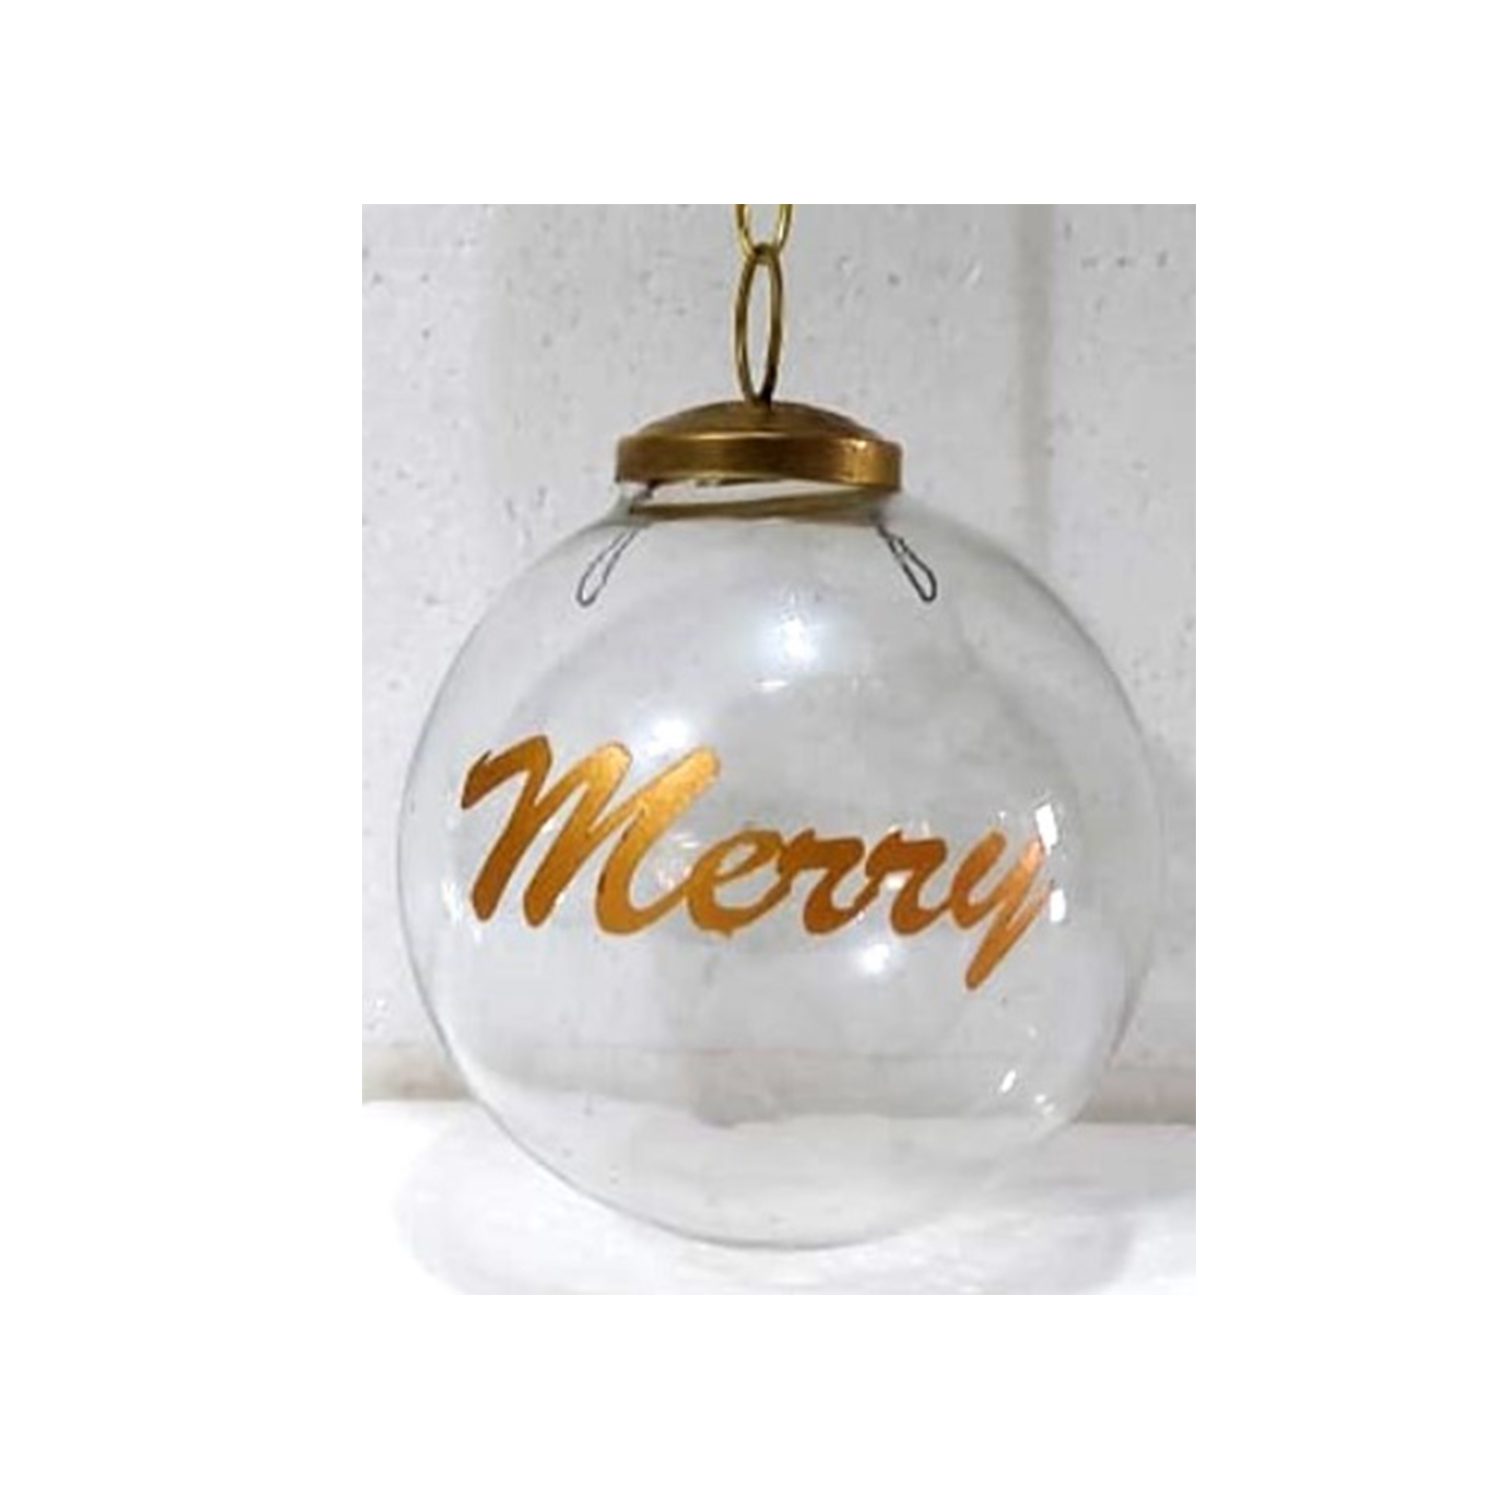 Ferne Glass Ornament, Transparent with Gold